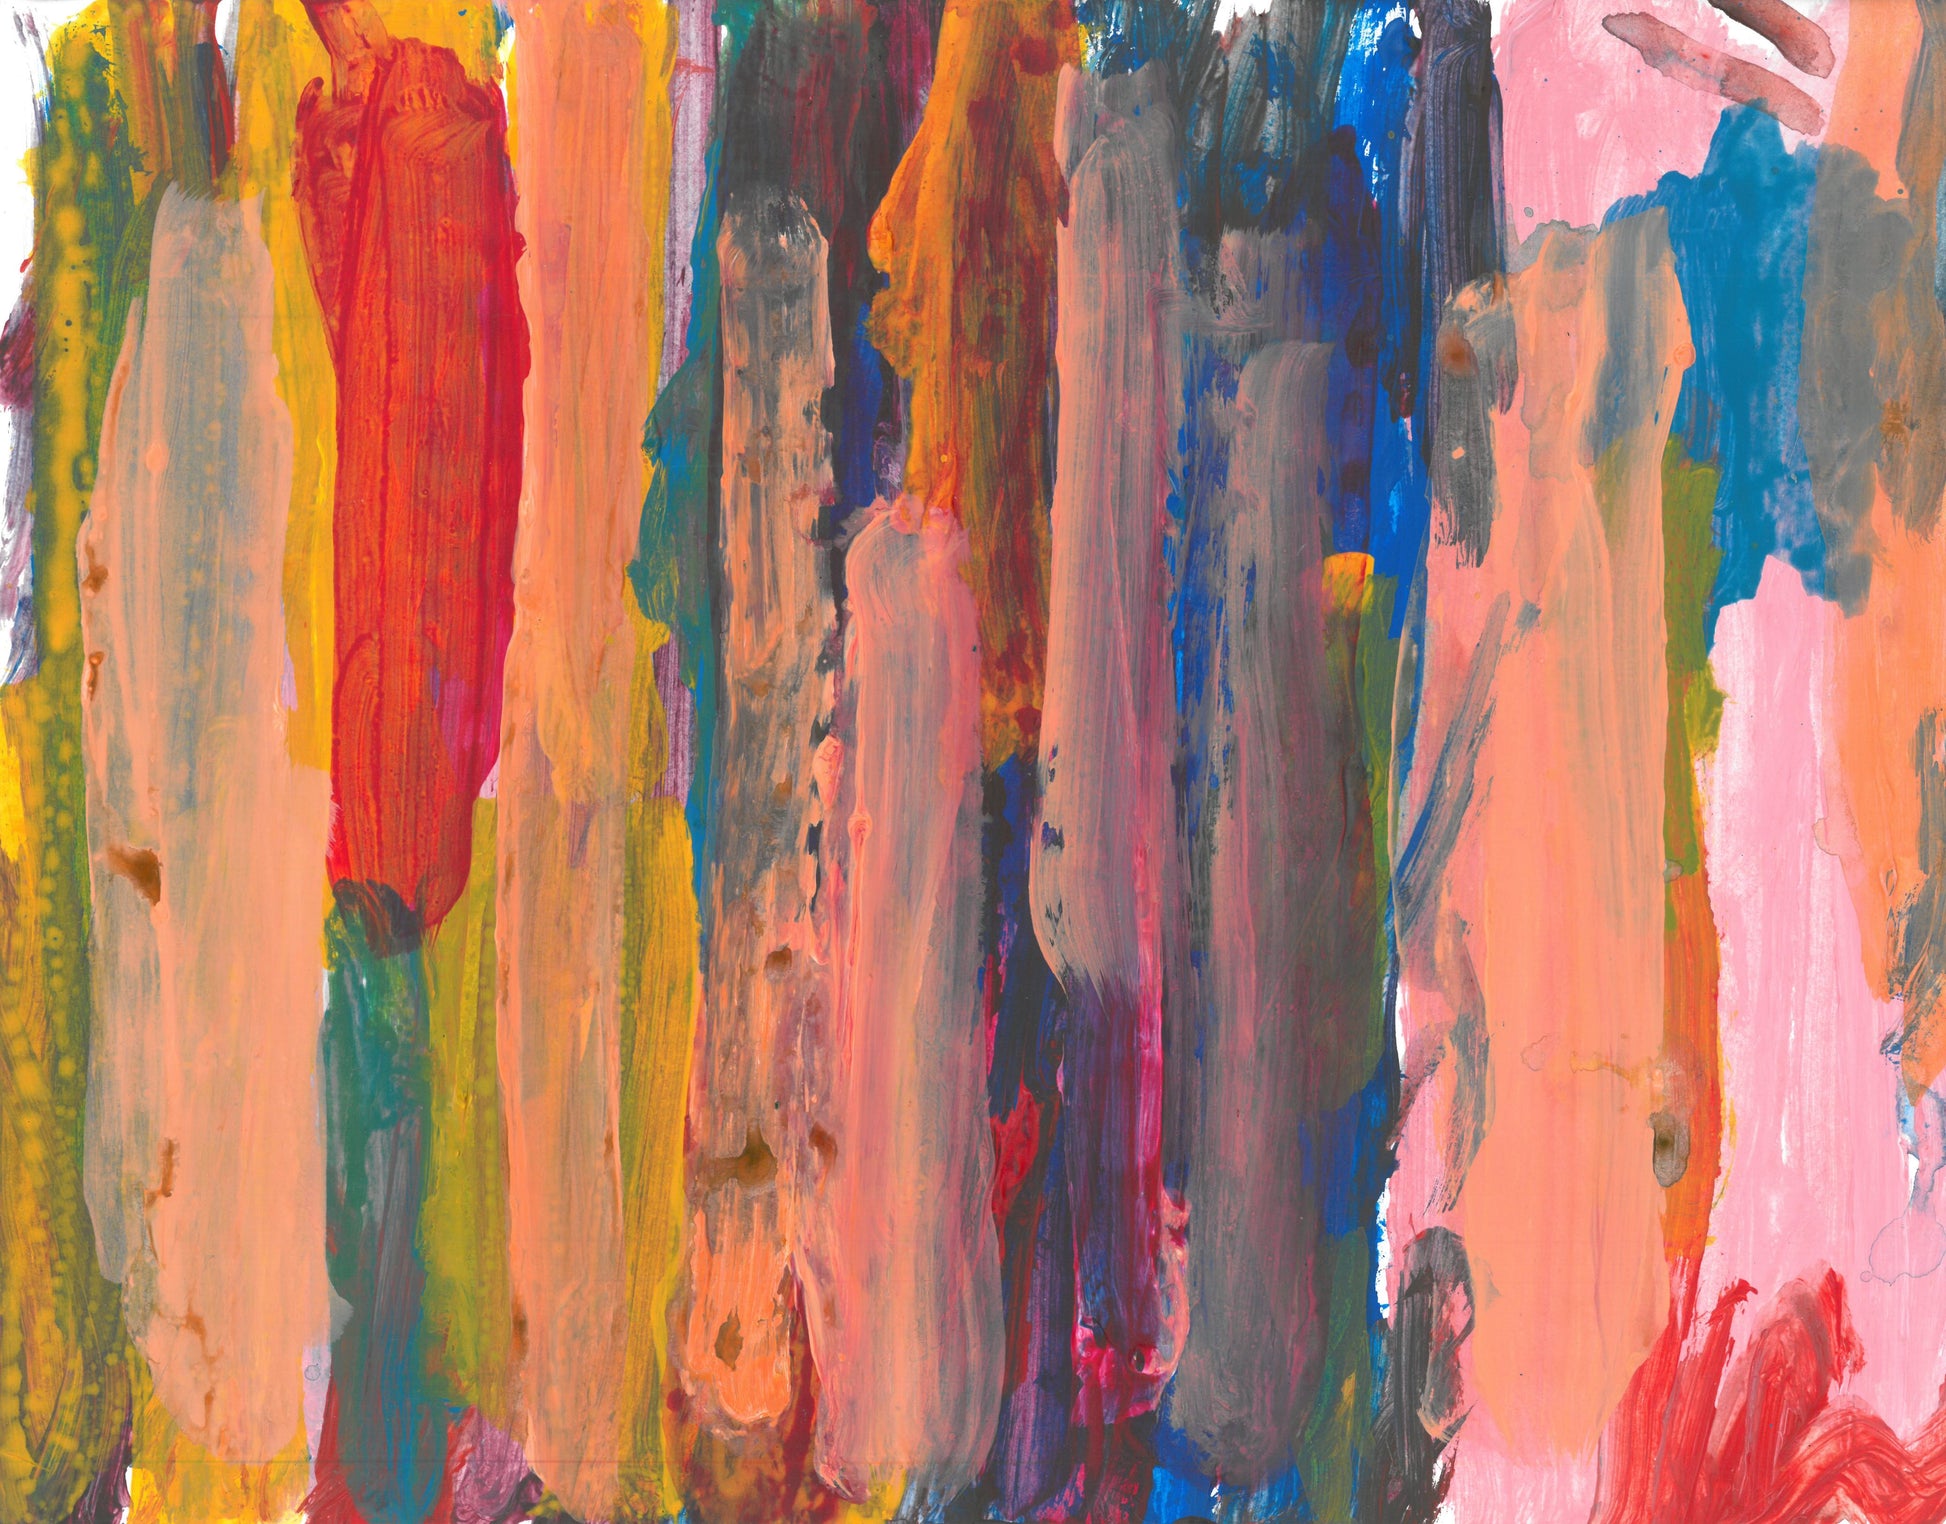 Layers of vertical brushstrokes overlapping. In the center the background is a dark blue, to the left is yellow, and the right is pink. The top layer of brushstrokes are mostly a pale pink